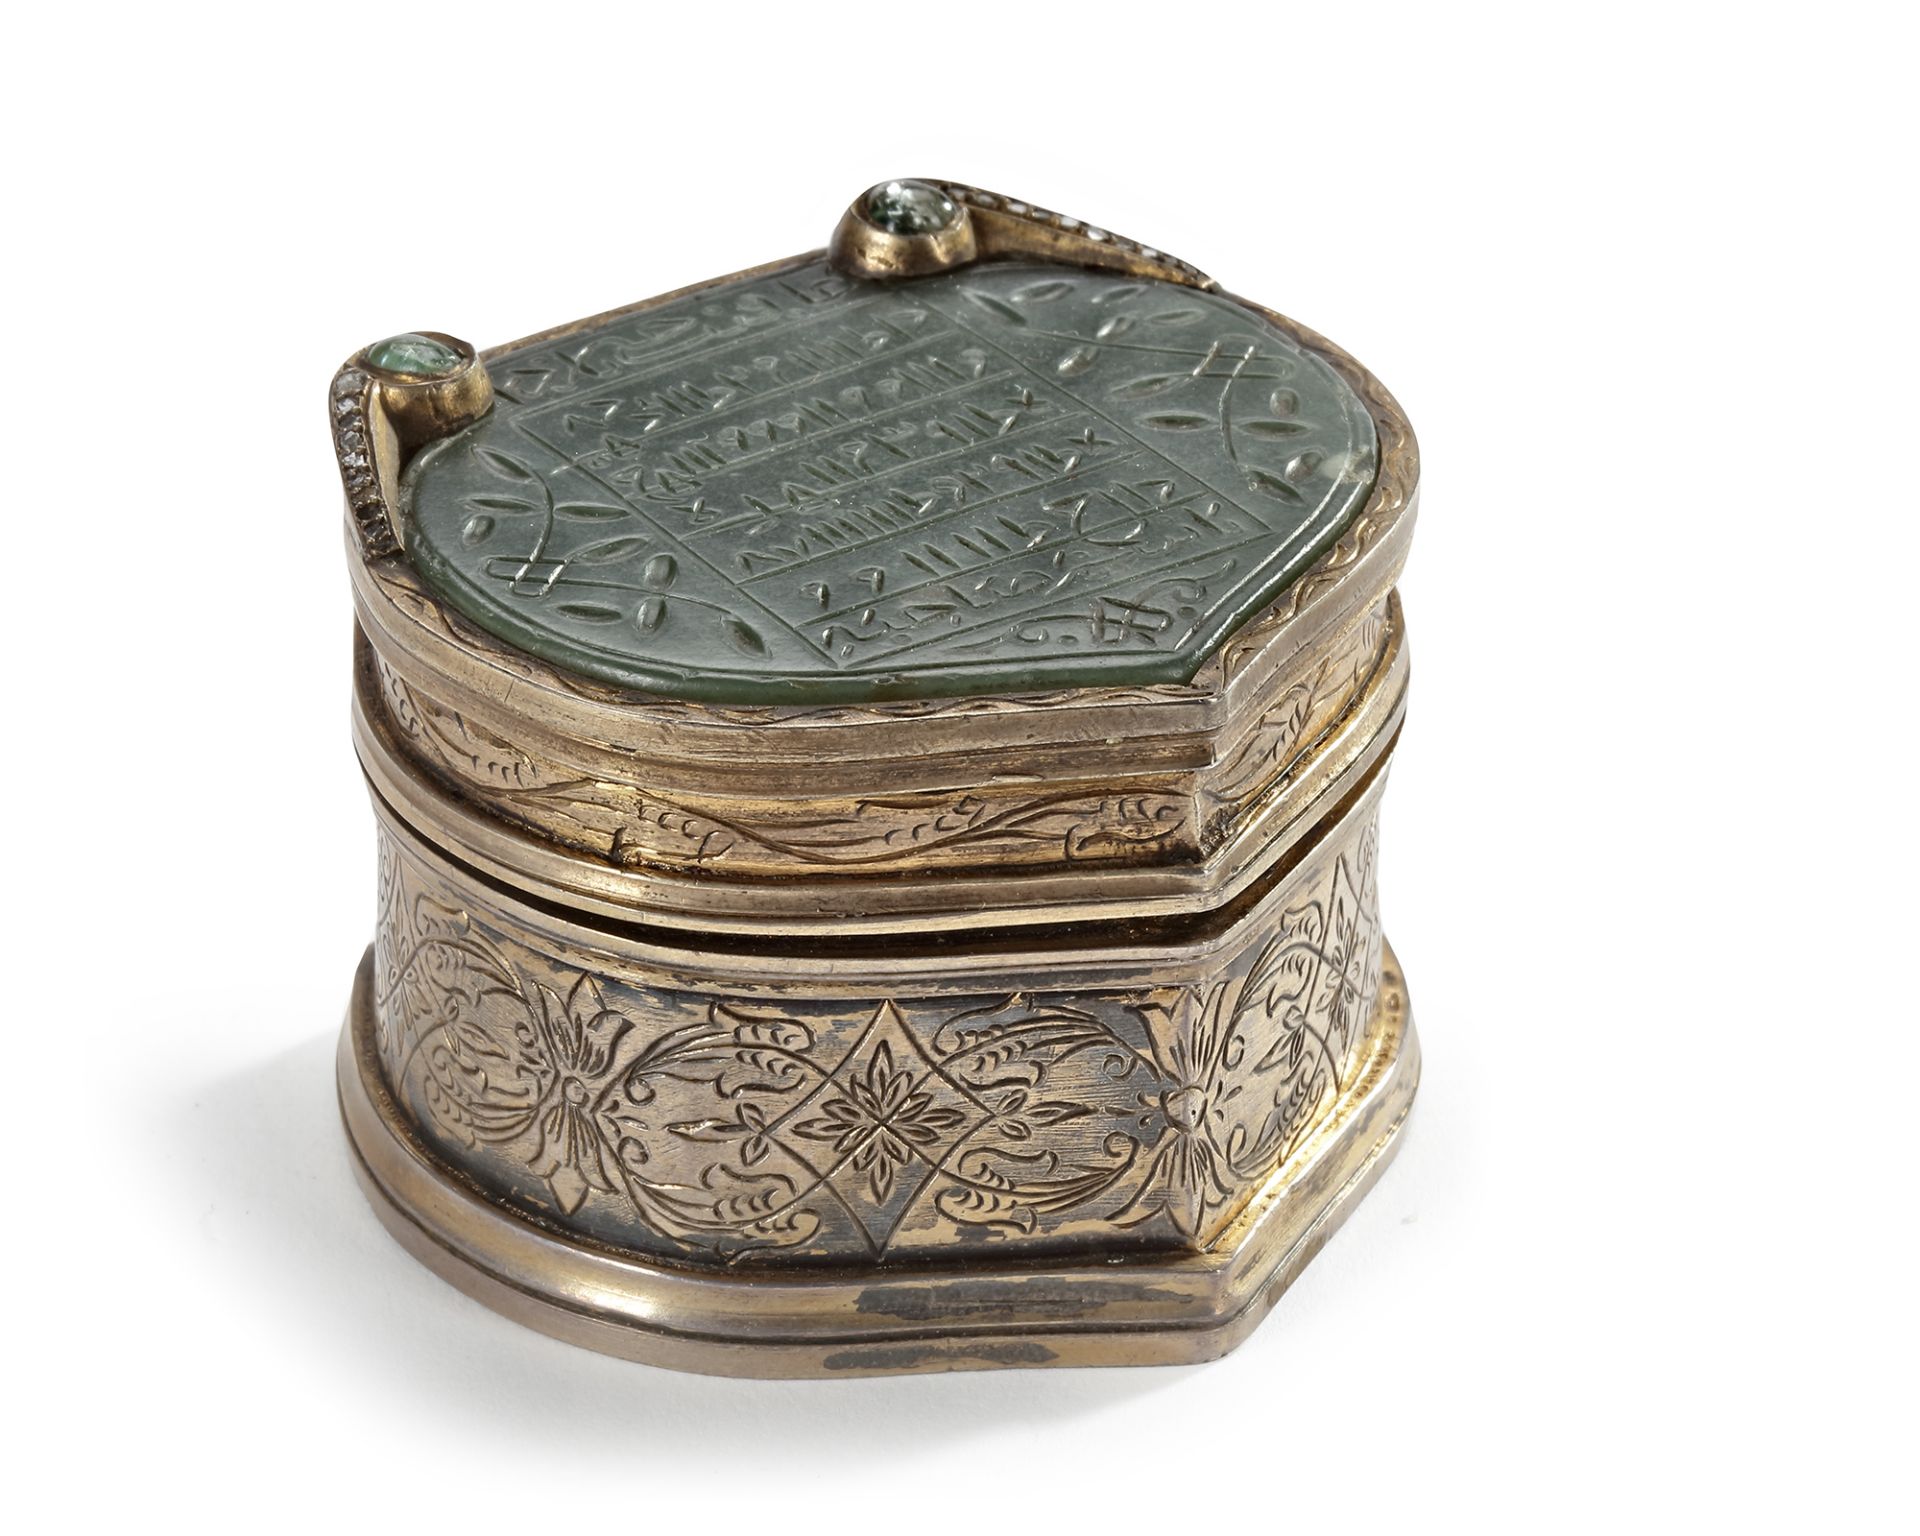 AN OTTOMAN JADE AND GEM-SET SILVER PLATED CASKET, 16TH CENTURY - Image 7 of 12